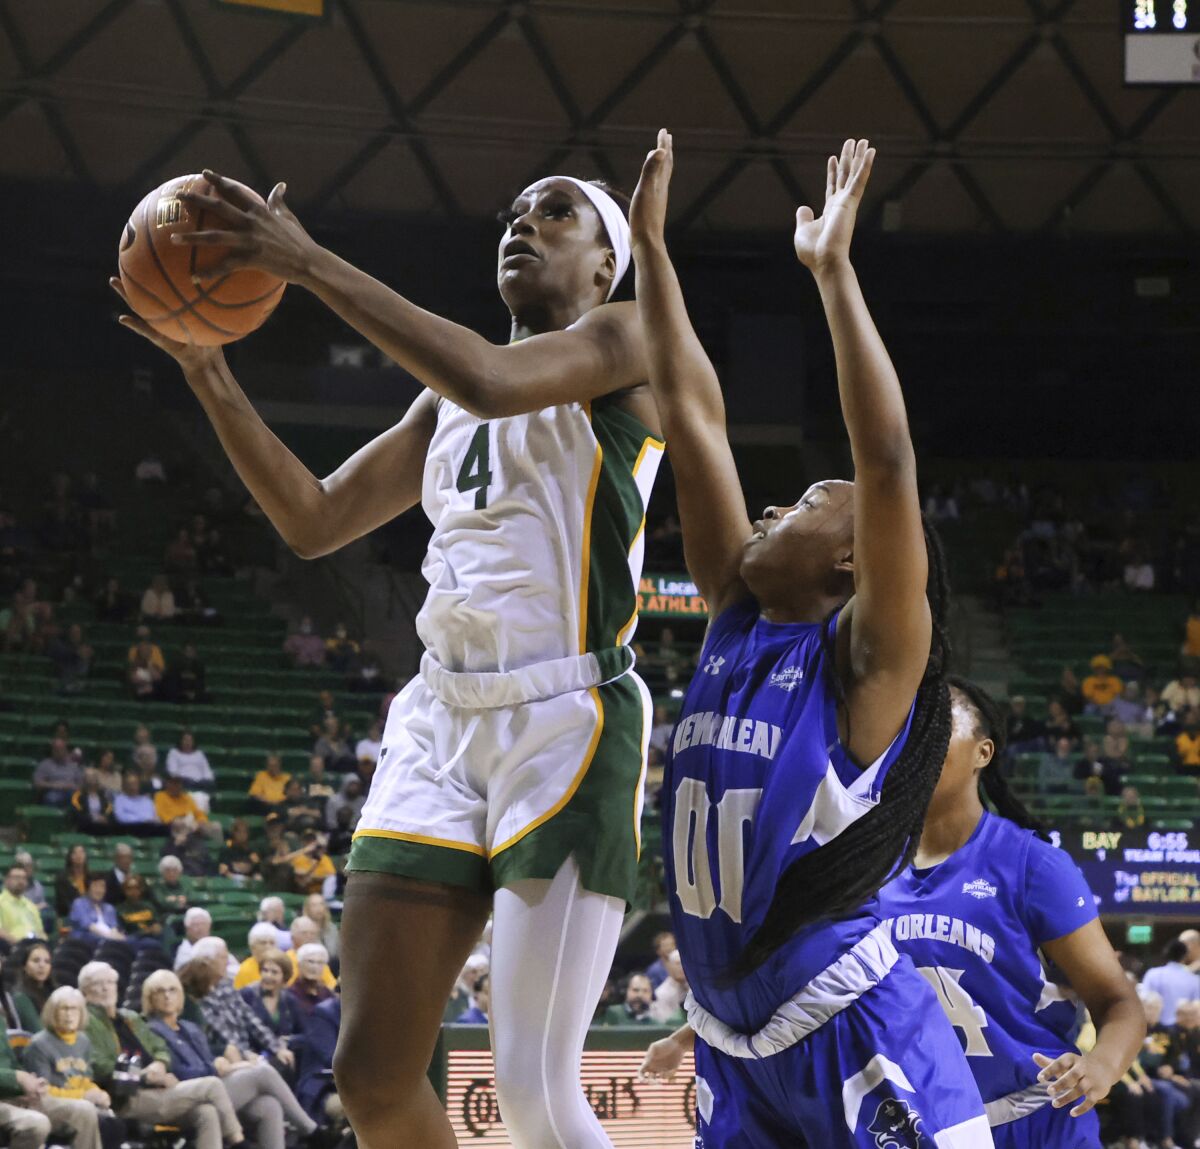 Baylor center Queen Egbo shoots in front of New Orleans guard Jomyra Mathis during the first half of an NCAA college basketball game Monday, Nov. 15, 2021, in Waco, Texas. (Rod Aydelotte/Waco Tribune-Herald via AP)